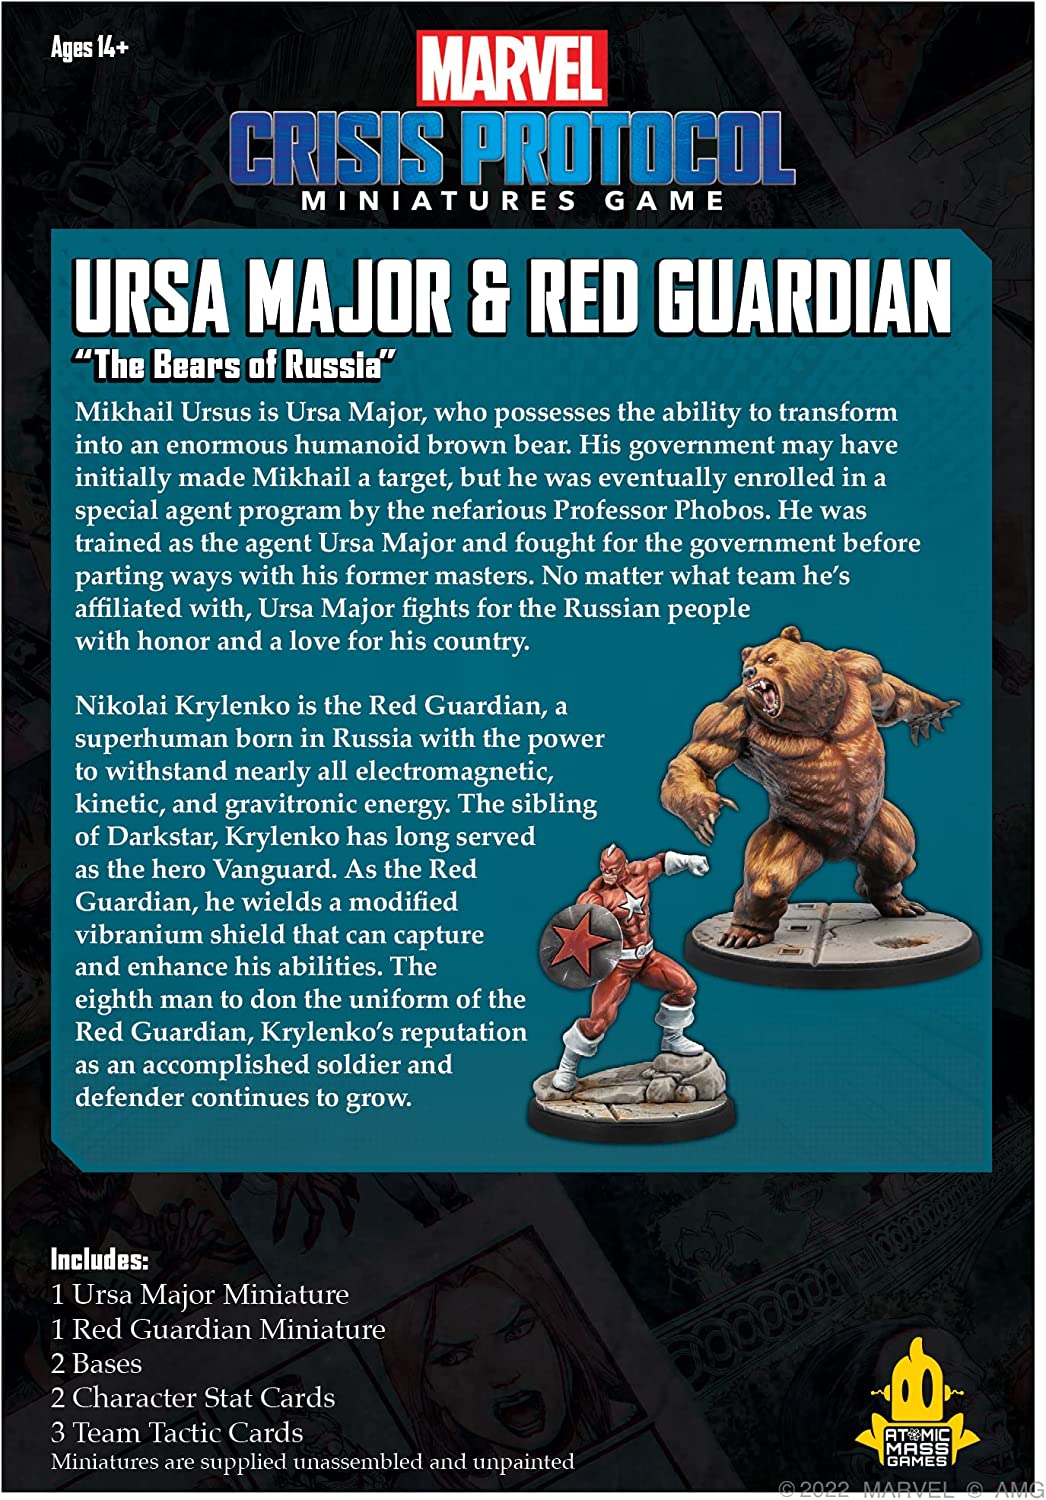 Atomic Mass Games Ursa Major & Red Guardian: Marvel Crisis Protocol Miniatures Game Ages 14+ 2 Players